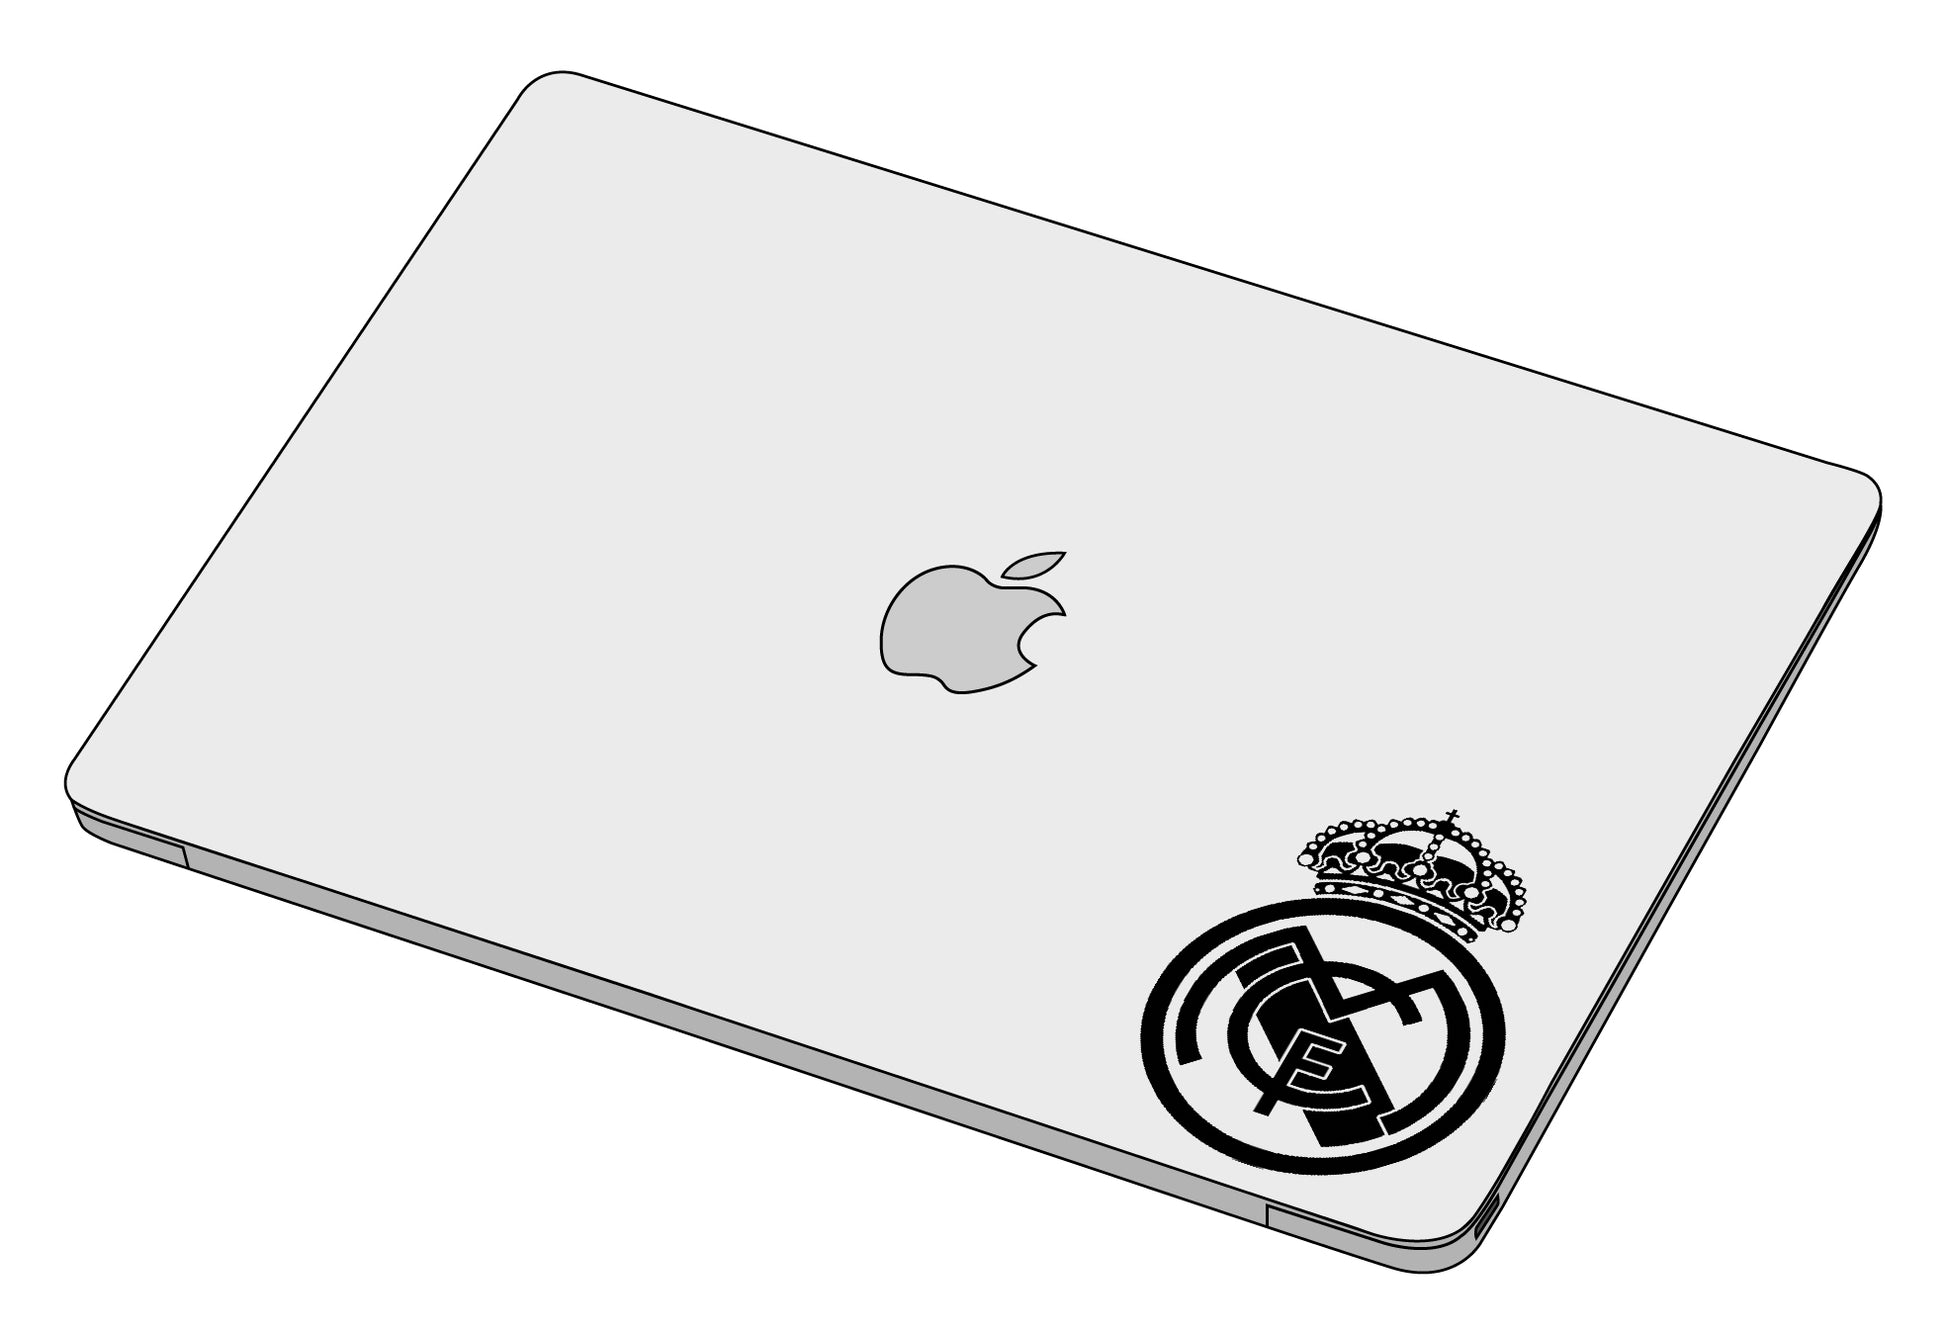 Real madrid logo sticker-Decal-]-Best laptop stickers in Egypt.-sticktop